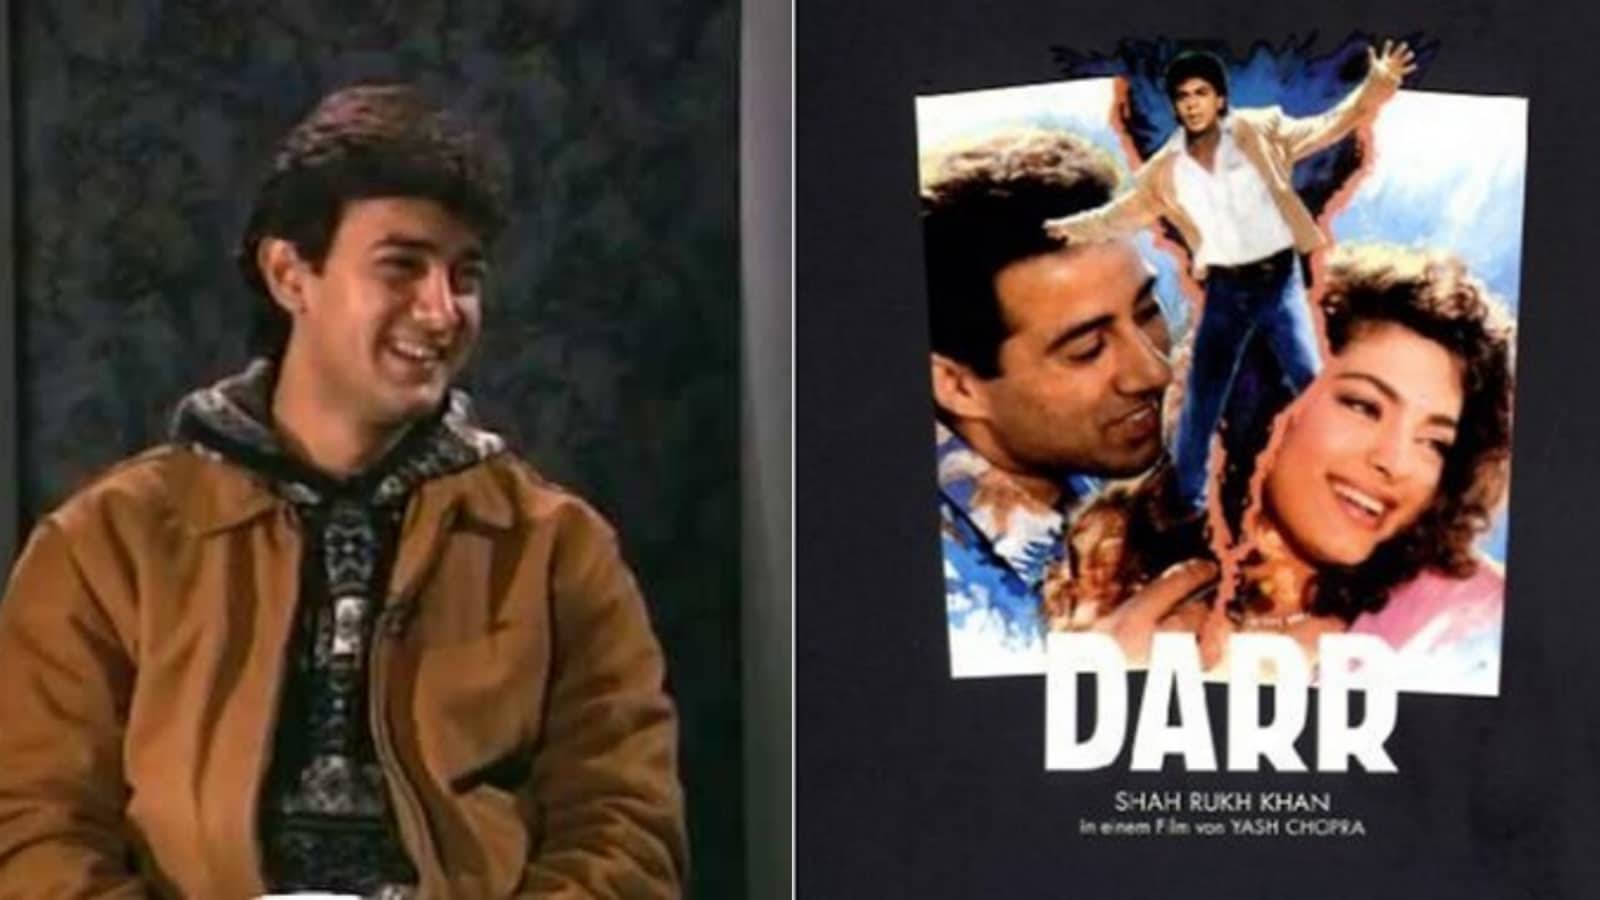 When Aamir Khan revealed why he was ‘removed’ from the movie Darr